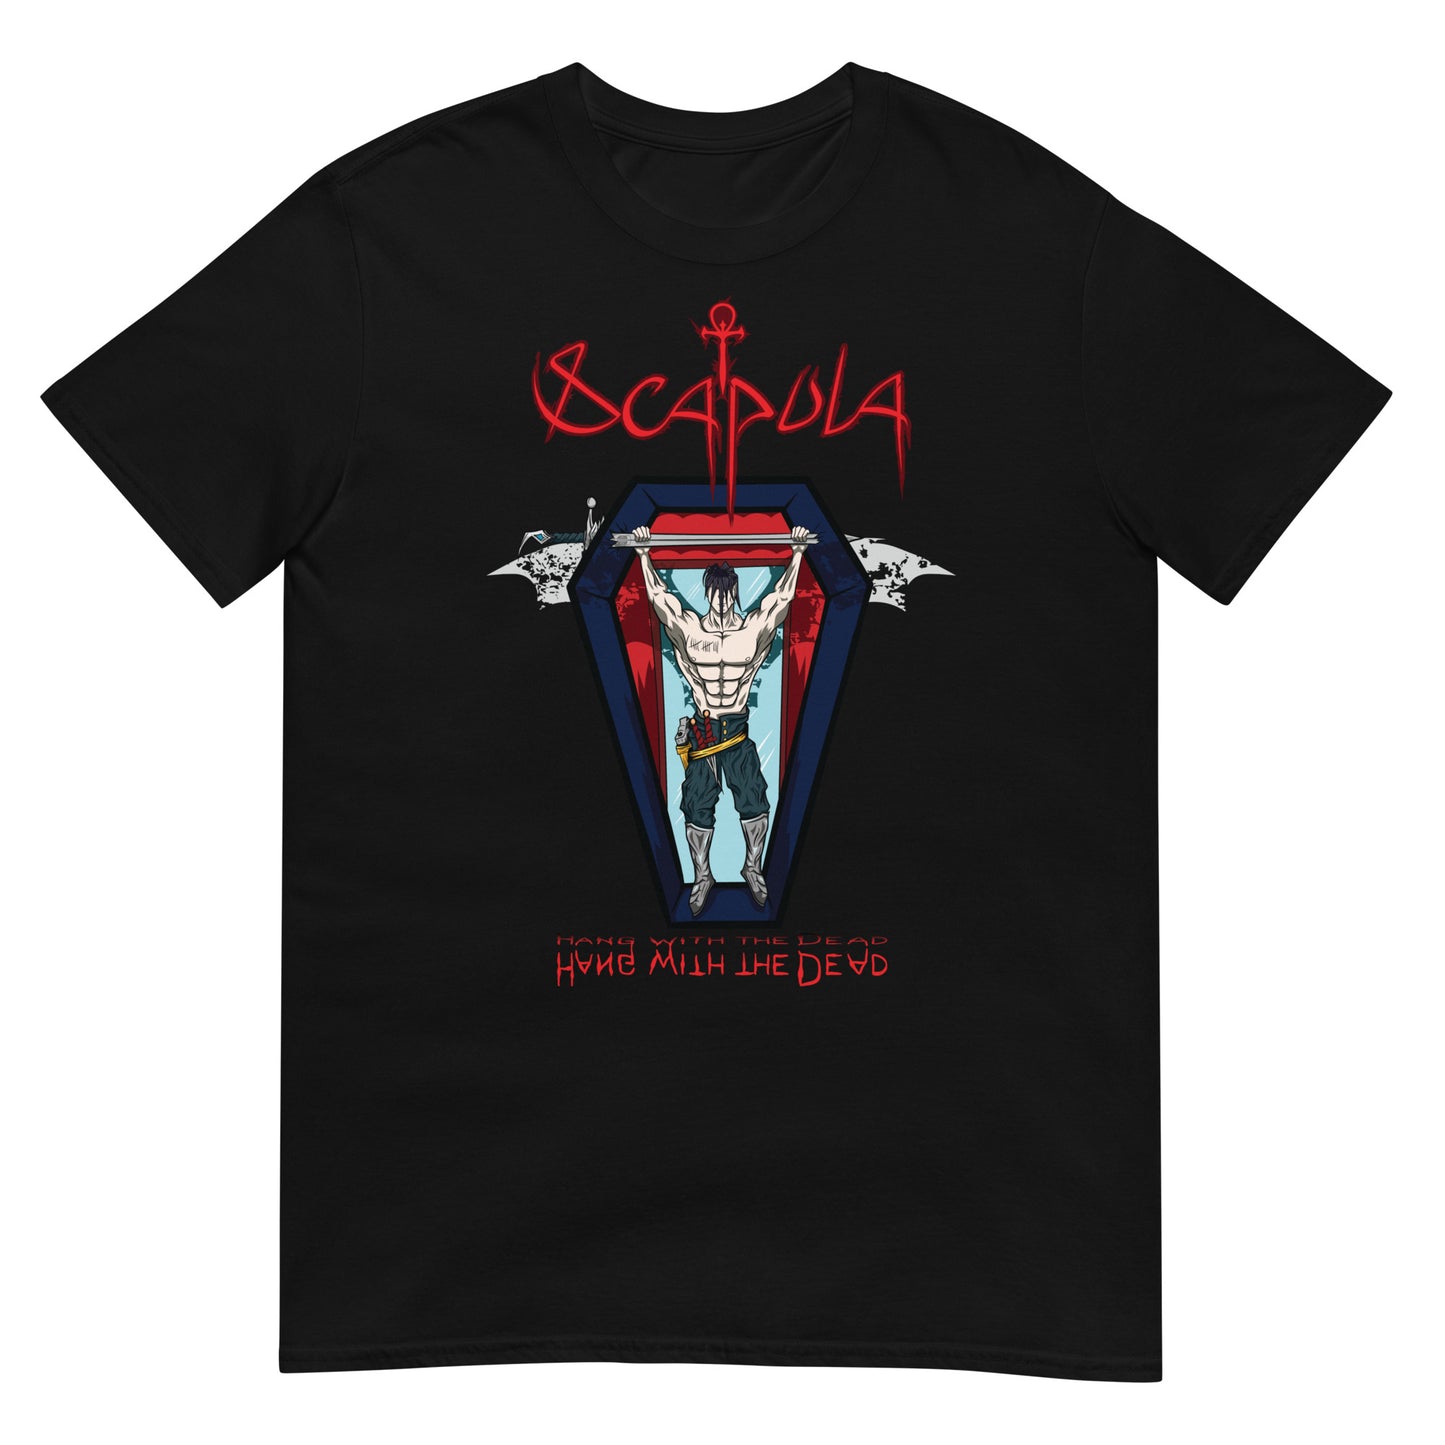 Scapula: Hang with the Dead